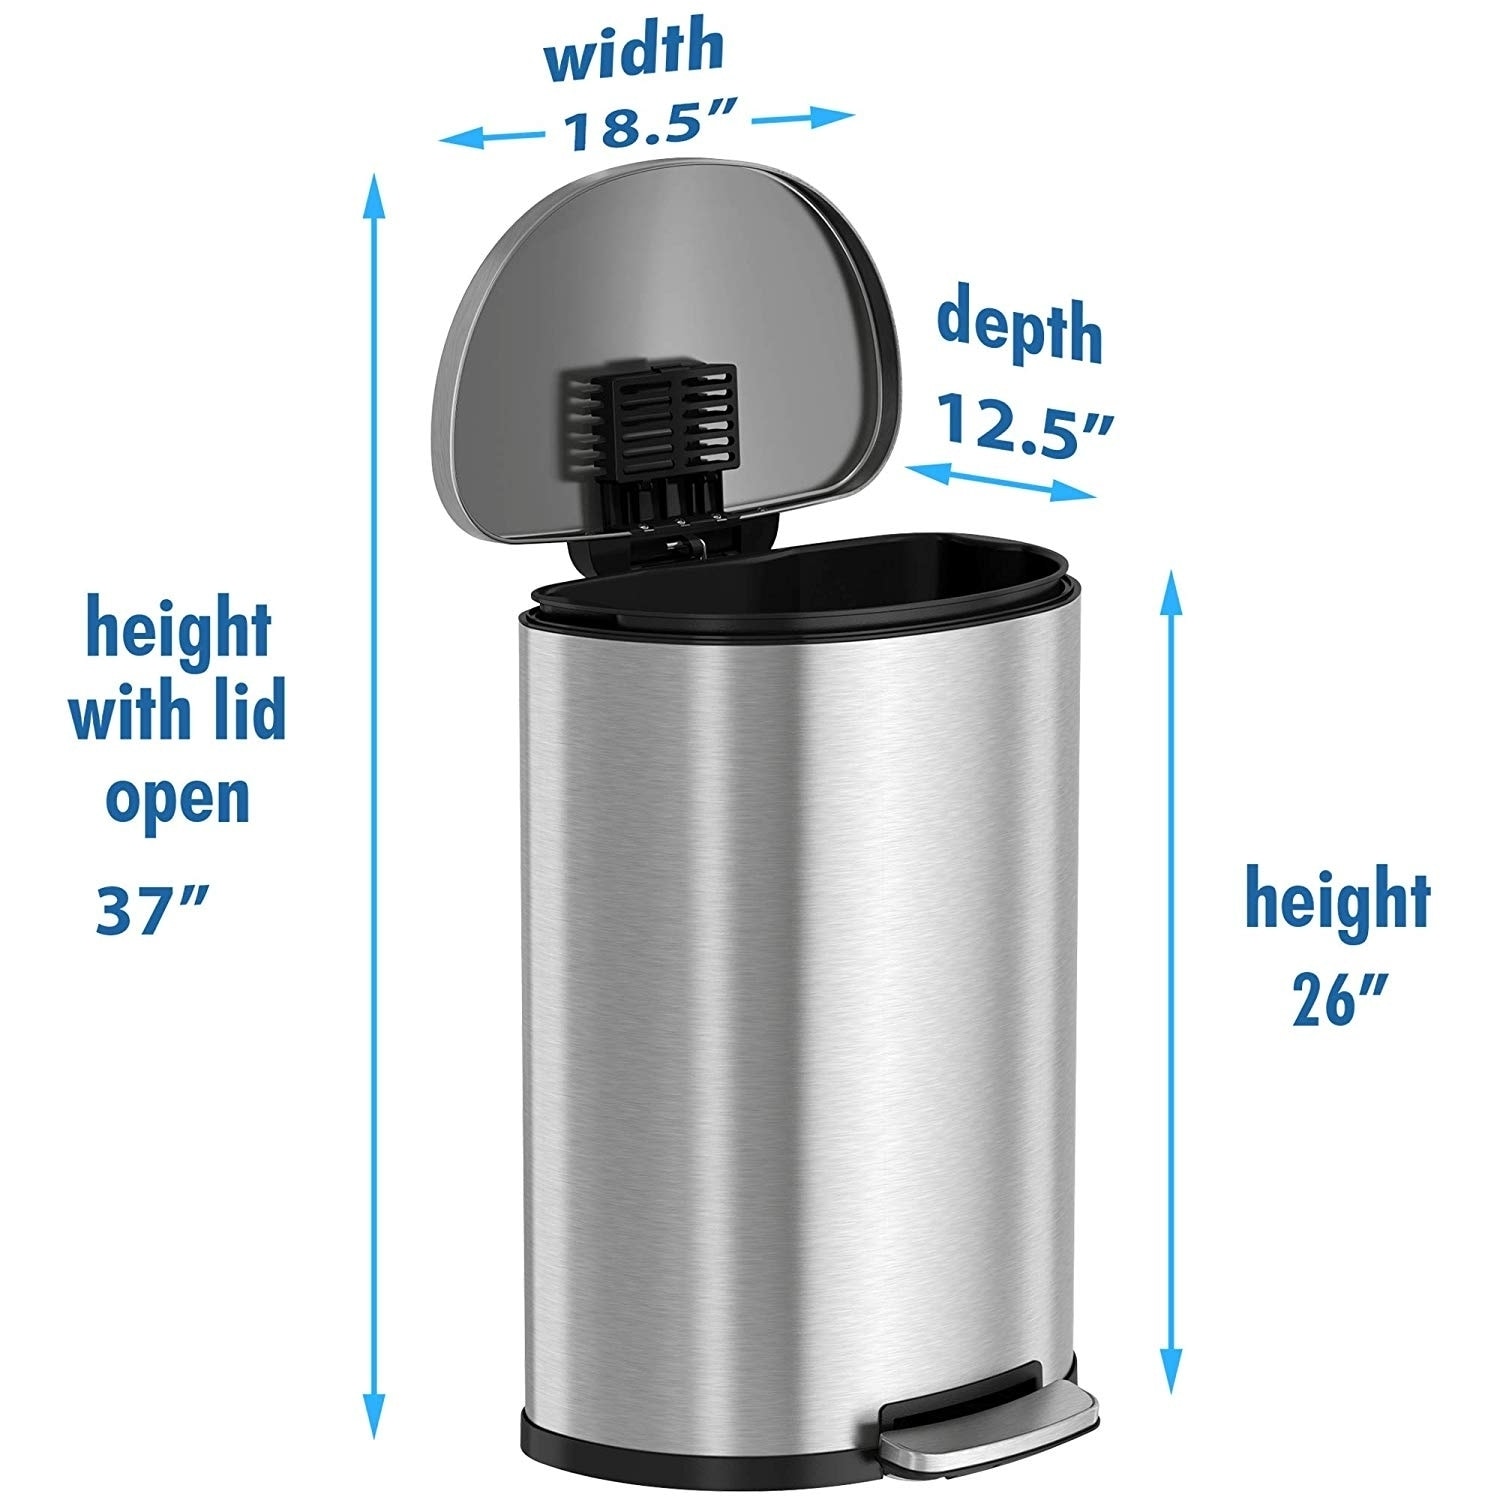 https://ak1.ostkcdn.com/images/products/29352793/iTouchless-SoftStep-13.2-Gallon-Semi-Round-Stainless-Steel-Step-Trash-Can-with-Odor-Control-System-4ba1e556-5011-4677-b42c-dfdd89bac53b.jpg